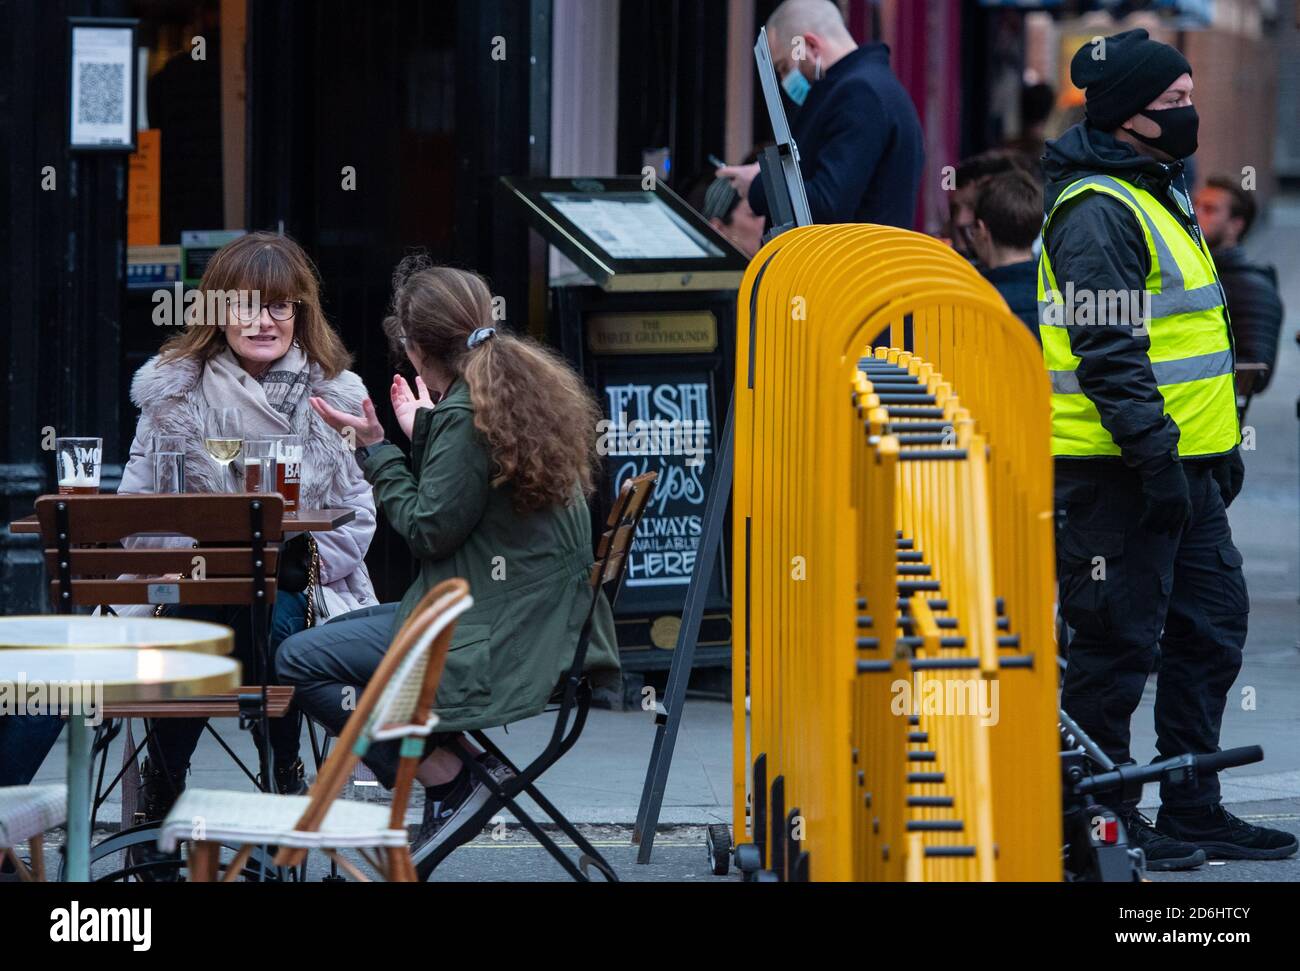 Drinkers outside a pub in Soho, London, on the first day after the city was put into Tier 2 restrictions to curb the spread of coronavirus. Stock Photo